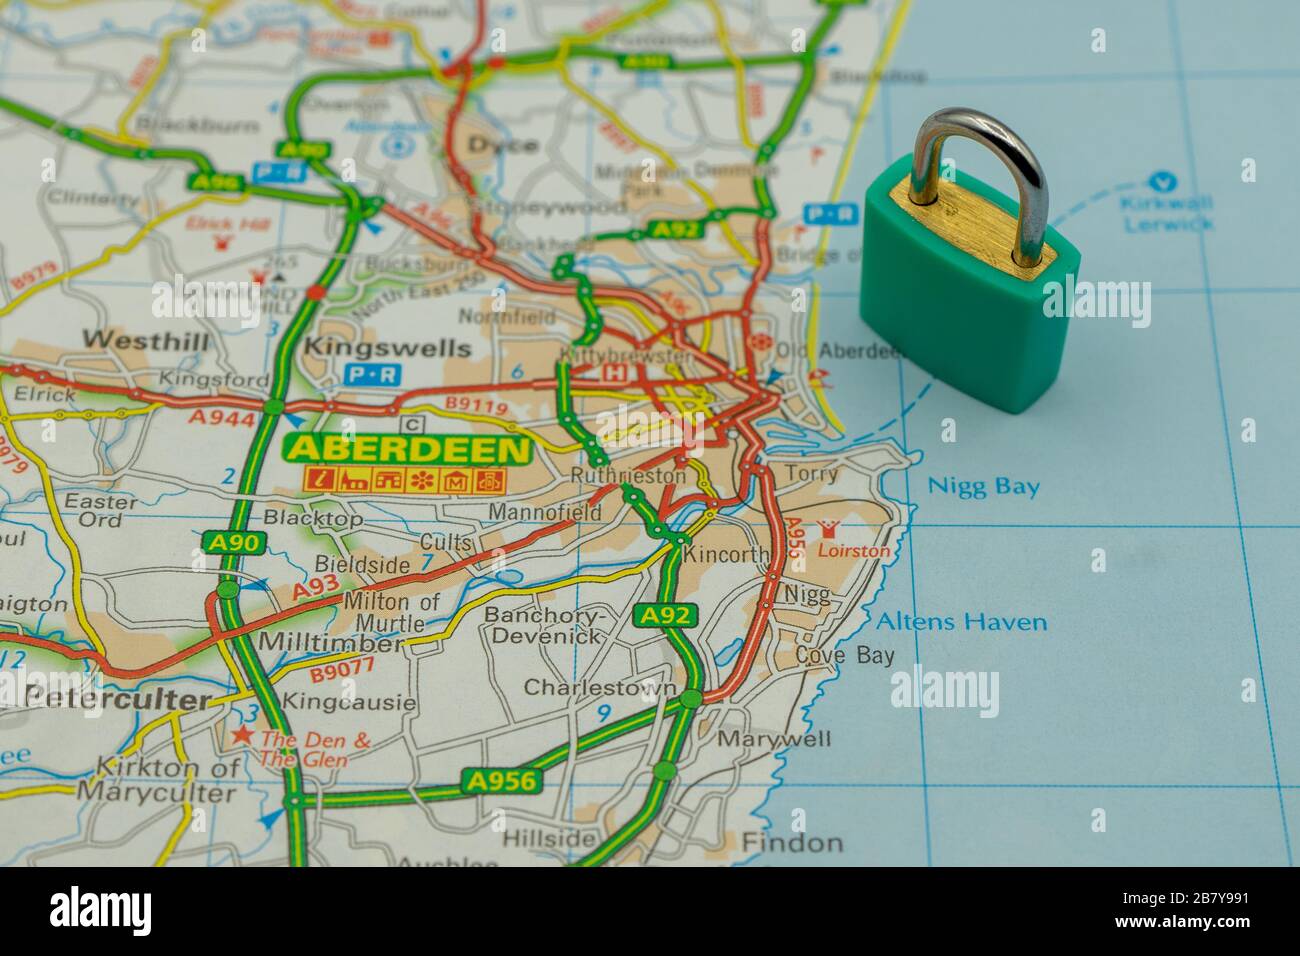 Aberdeen Shown on a road map or geography map with a padlock on top to represent a city in lock down Stock Photo